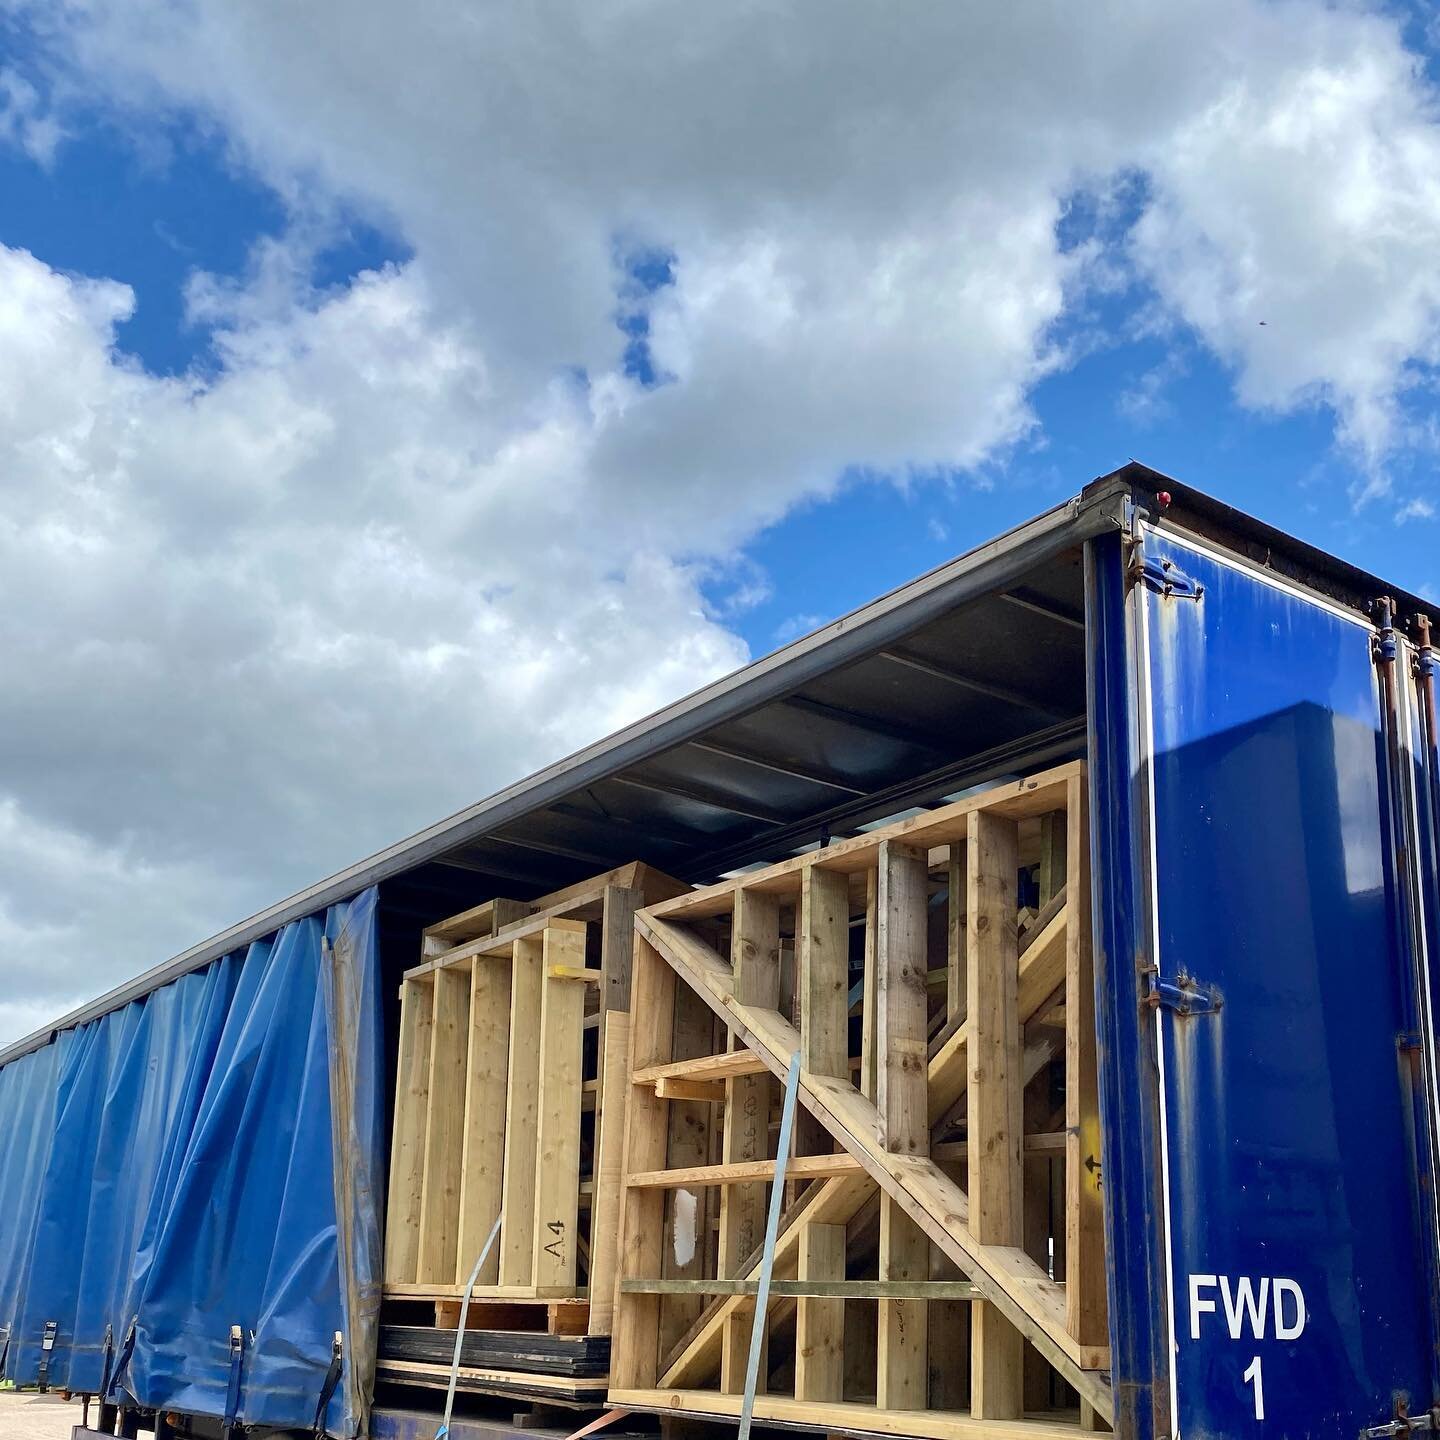 Exhibition frames for the return of outdoor events loaded and ready to go✅

We&rsquo;re excited to be returning to normality soon, which we hope means a busy summer is around the corner! 

 #exhibitions #events #displays #eventsindustry #outdoorevent